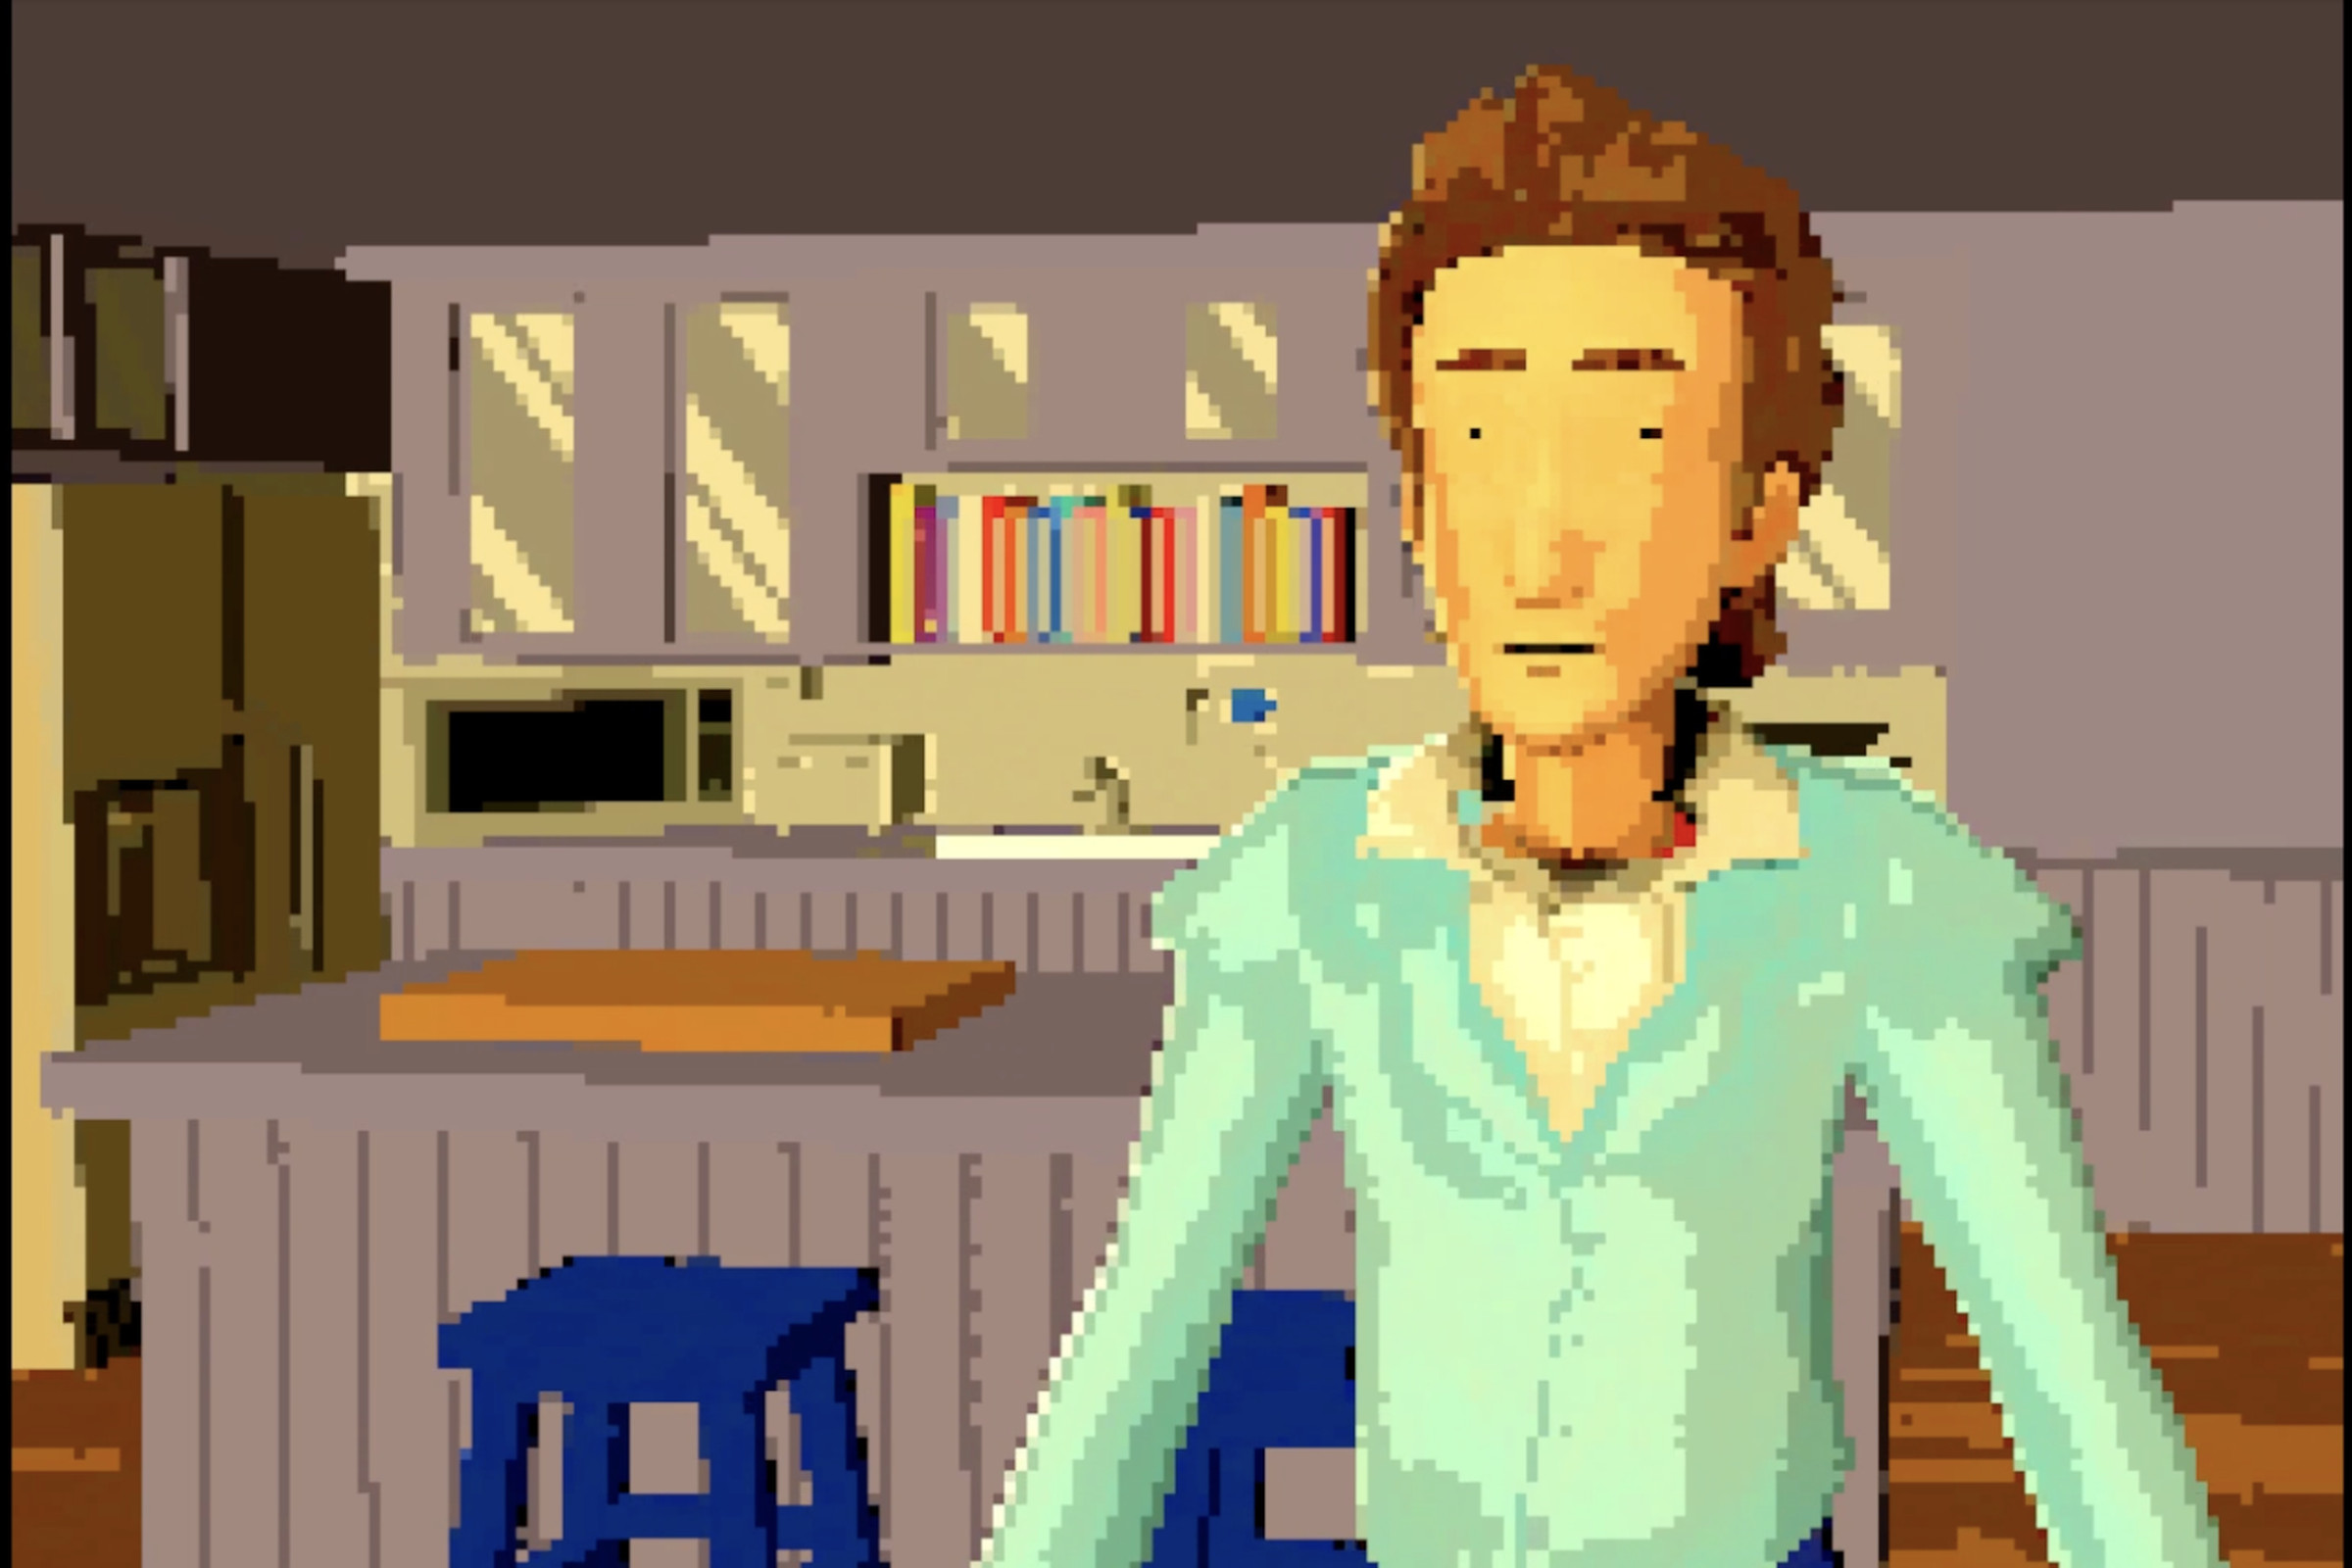 Screenshot from an “episode” of Nothing, Forever featuring Larry standing in a kitchen